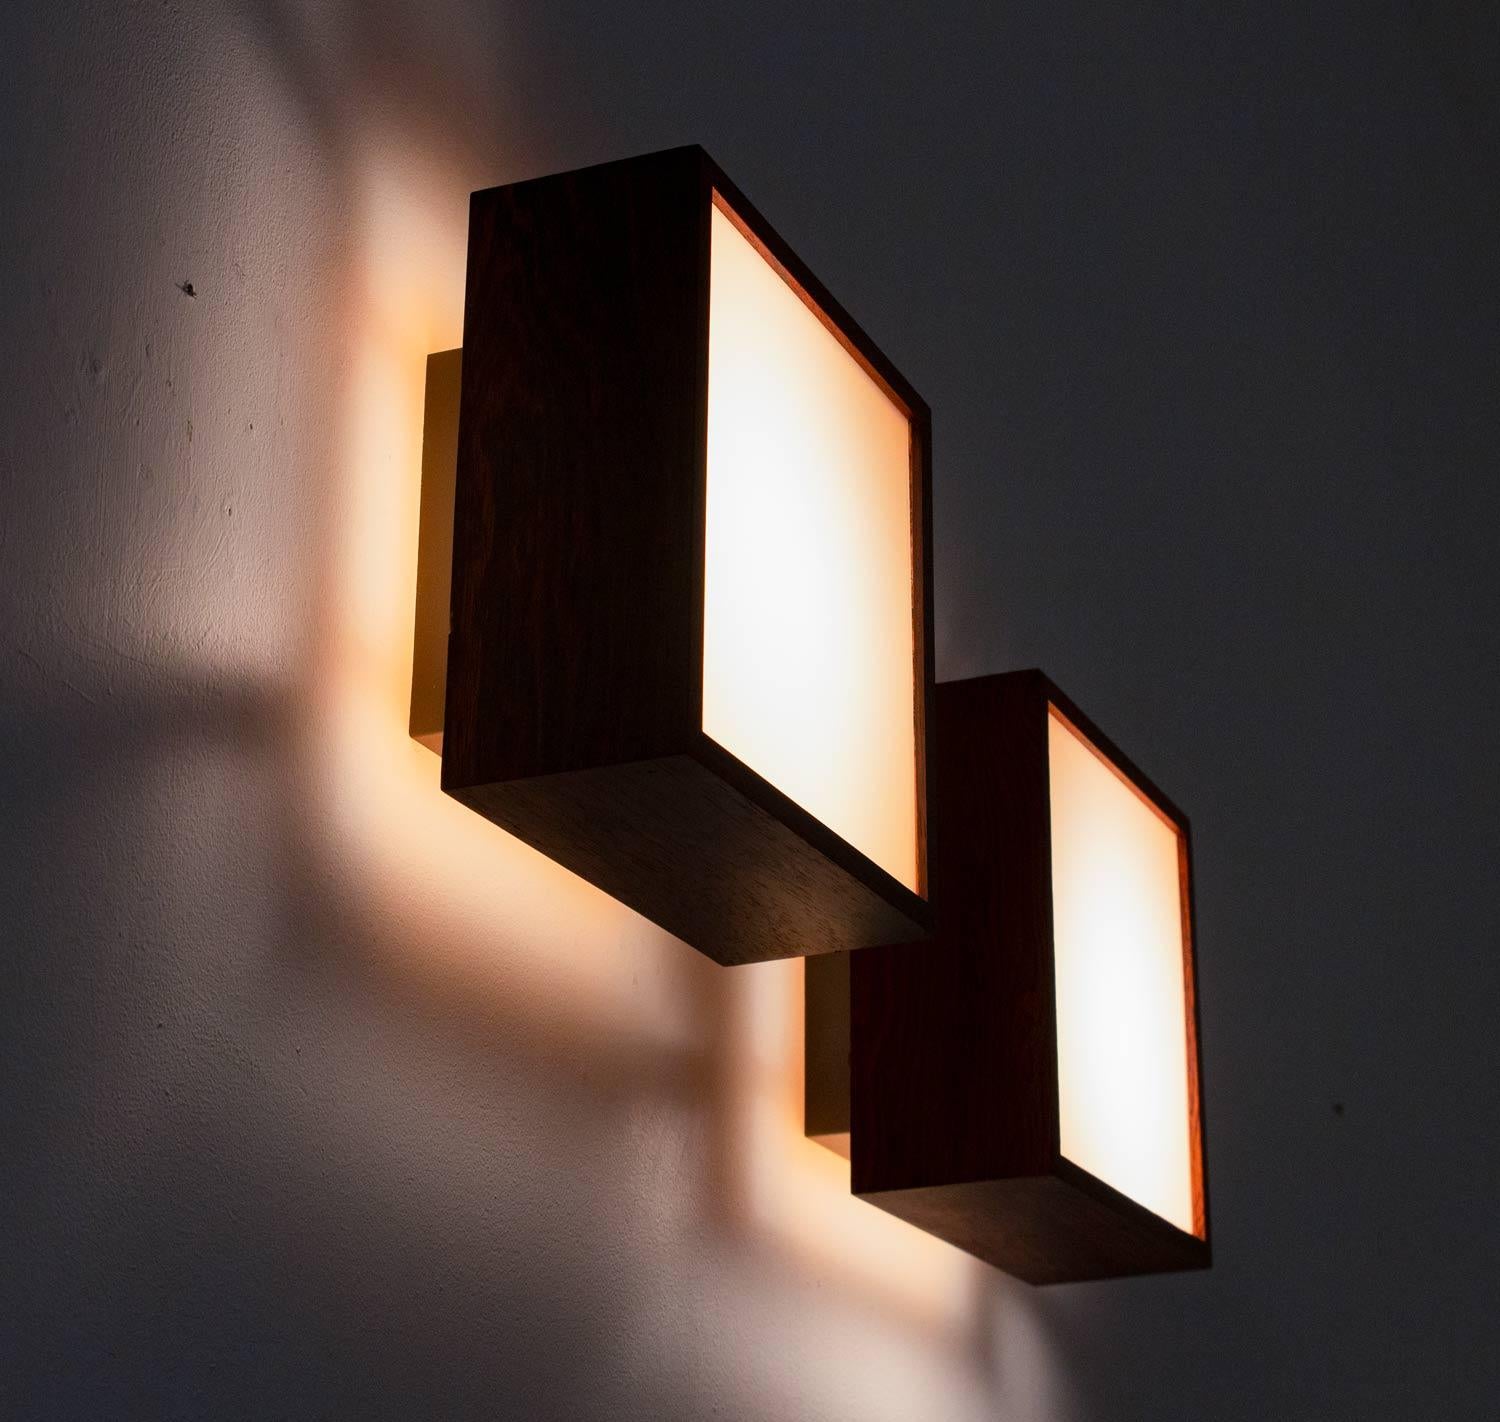 20th Century Pair of Wall Lamps / Sconces in Rosewood and Glass, by Falkenbergs, Sweden